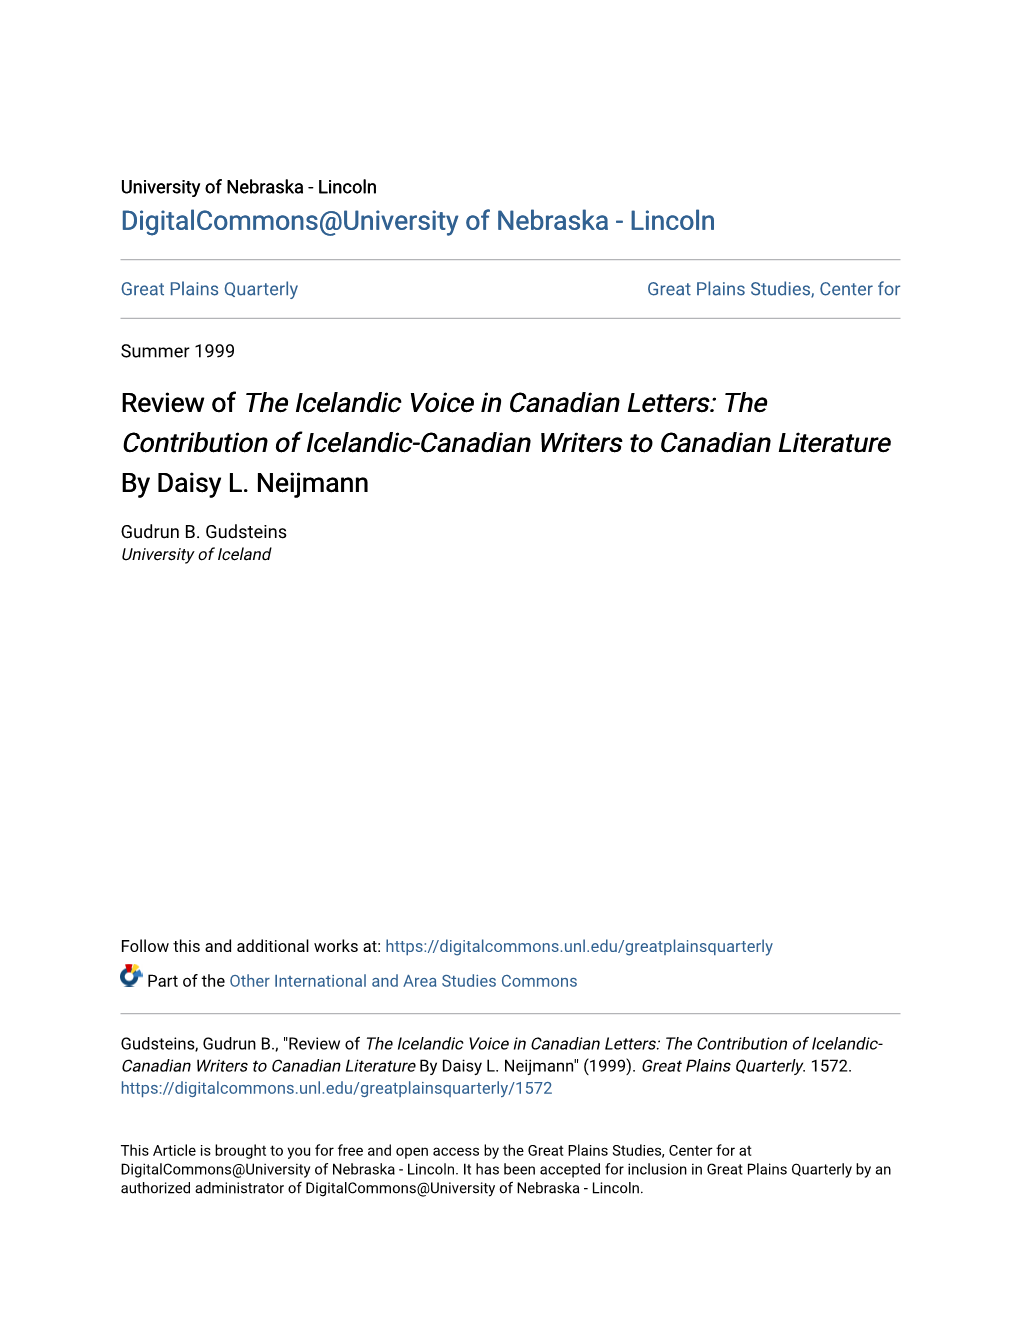 Review of the Icelandic Voice in Canadian Letters: the Contribution of Icelandic-Canadian Writers to Canadian Literature by Daisy L